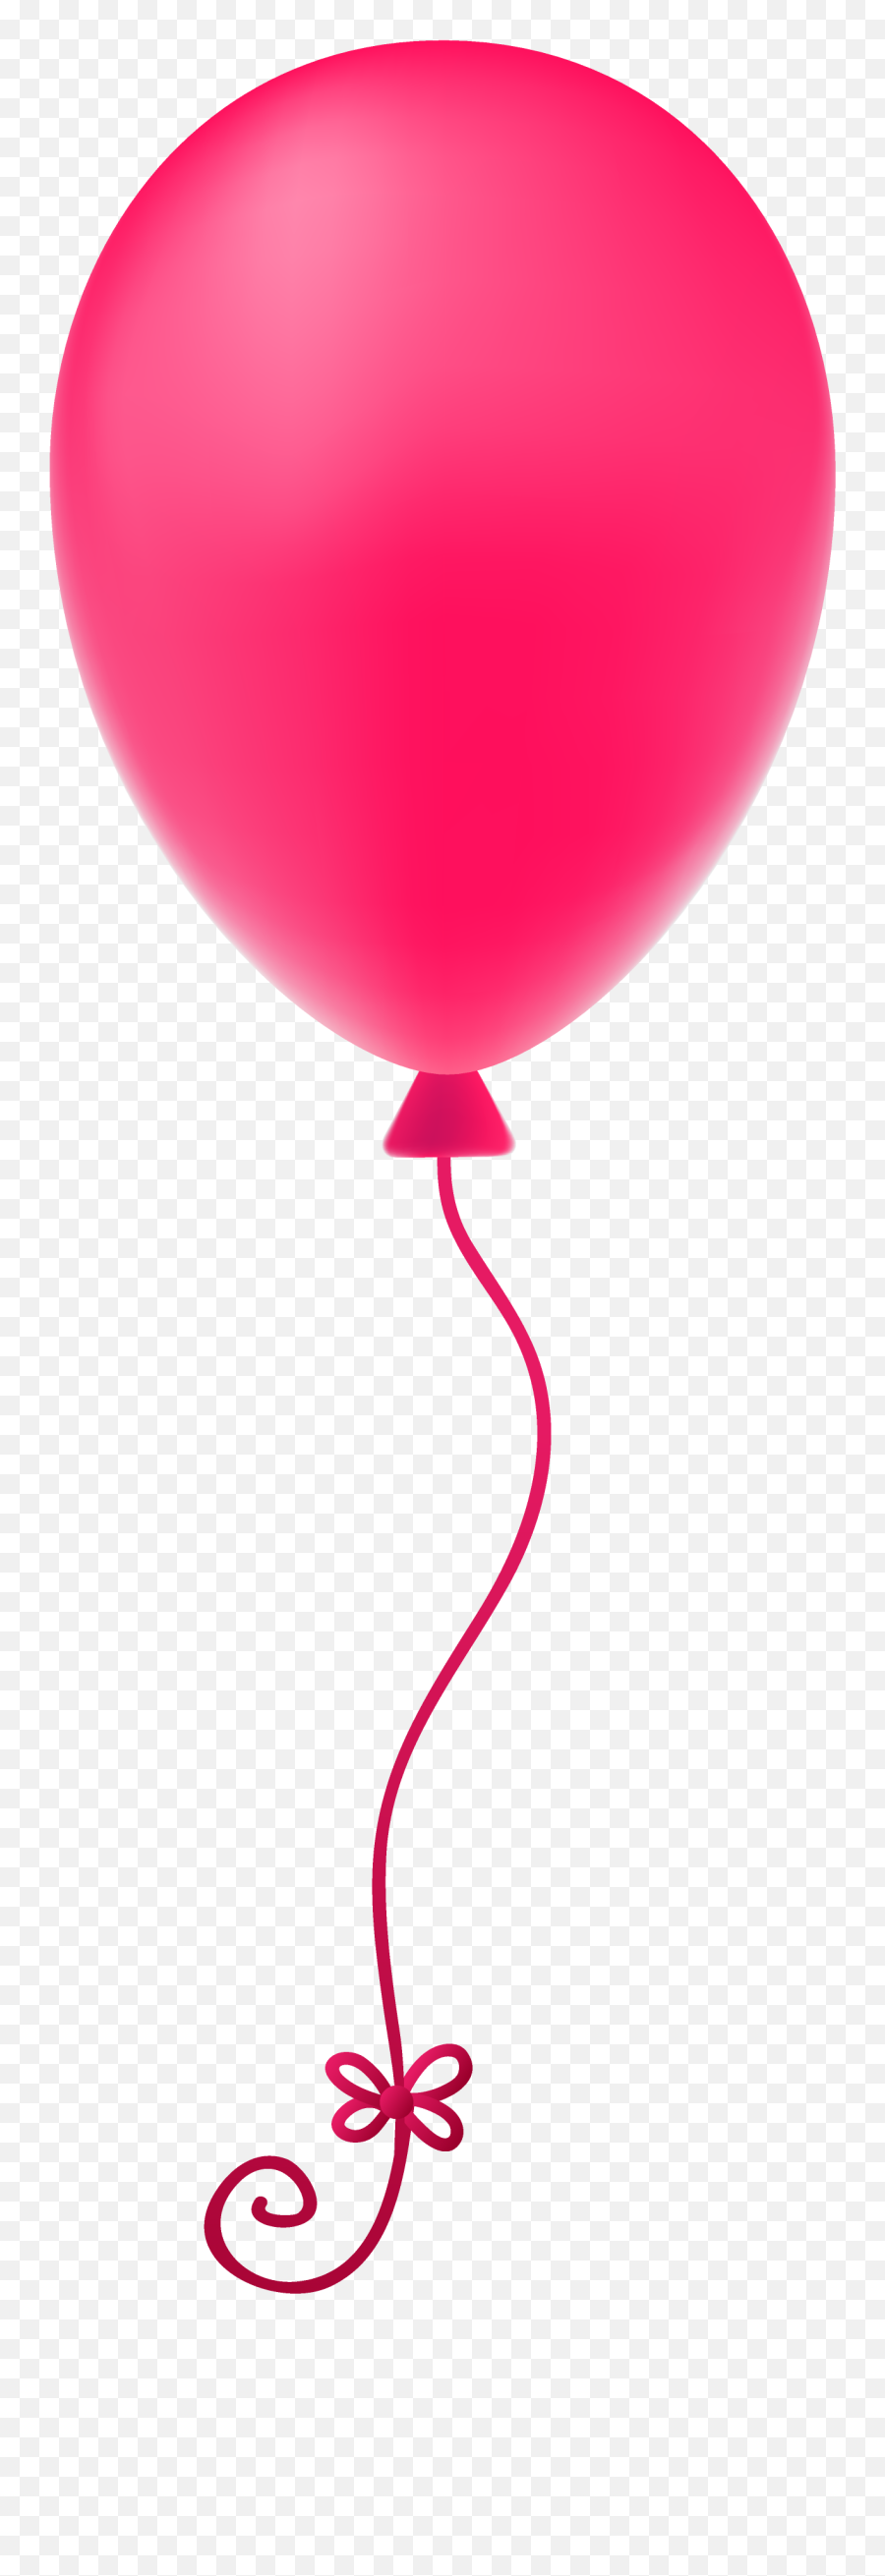 Balloon Png Images - Pngpix Balloon Illustration For Kids,Pink Balloons Png